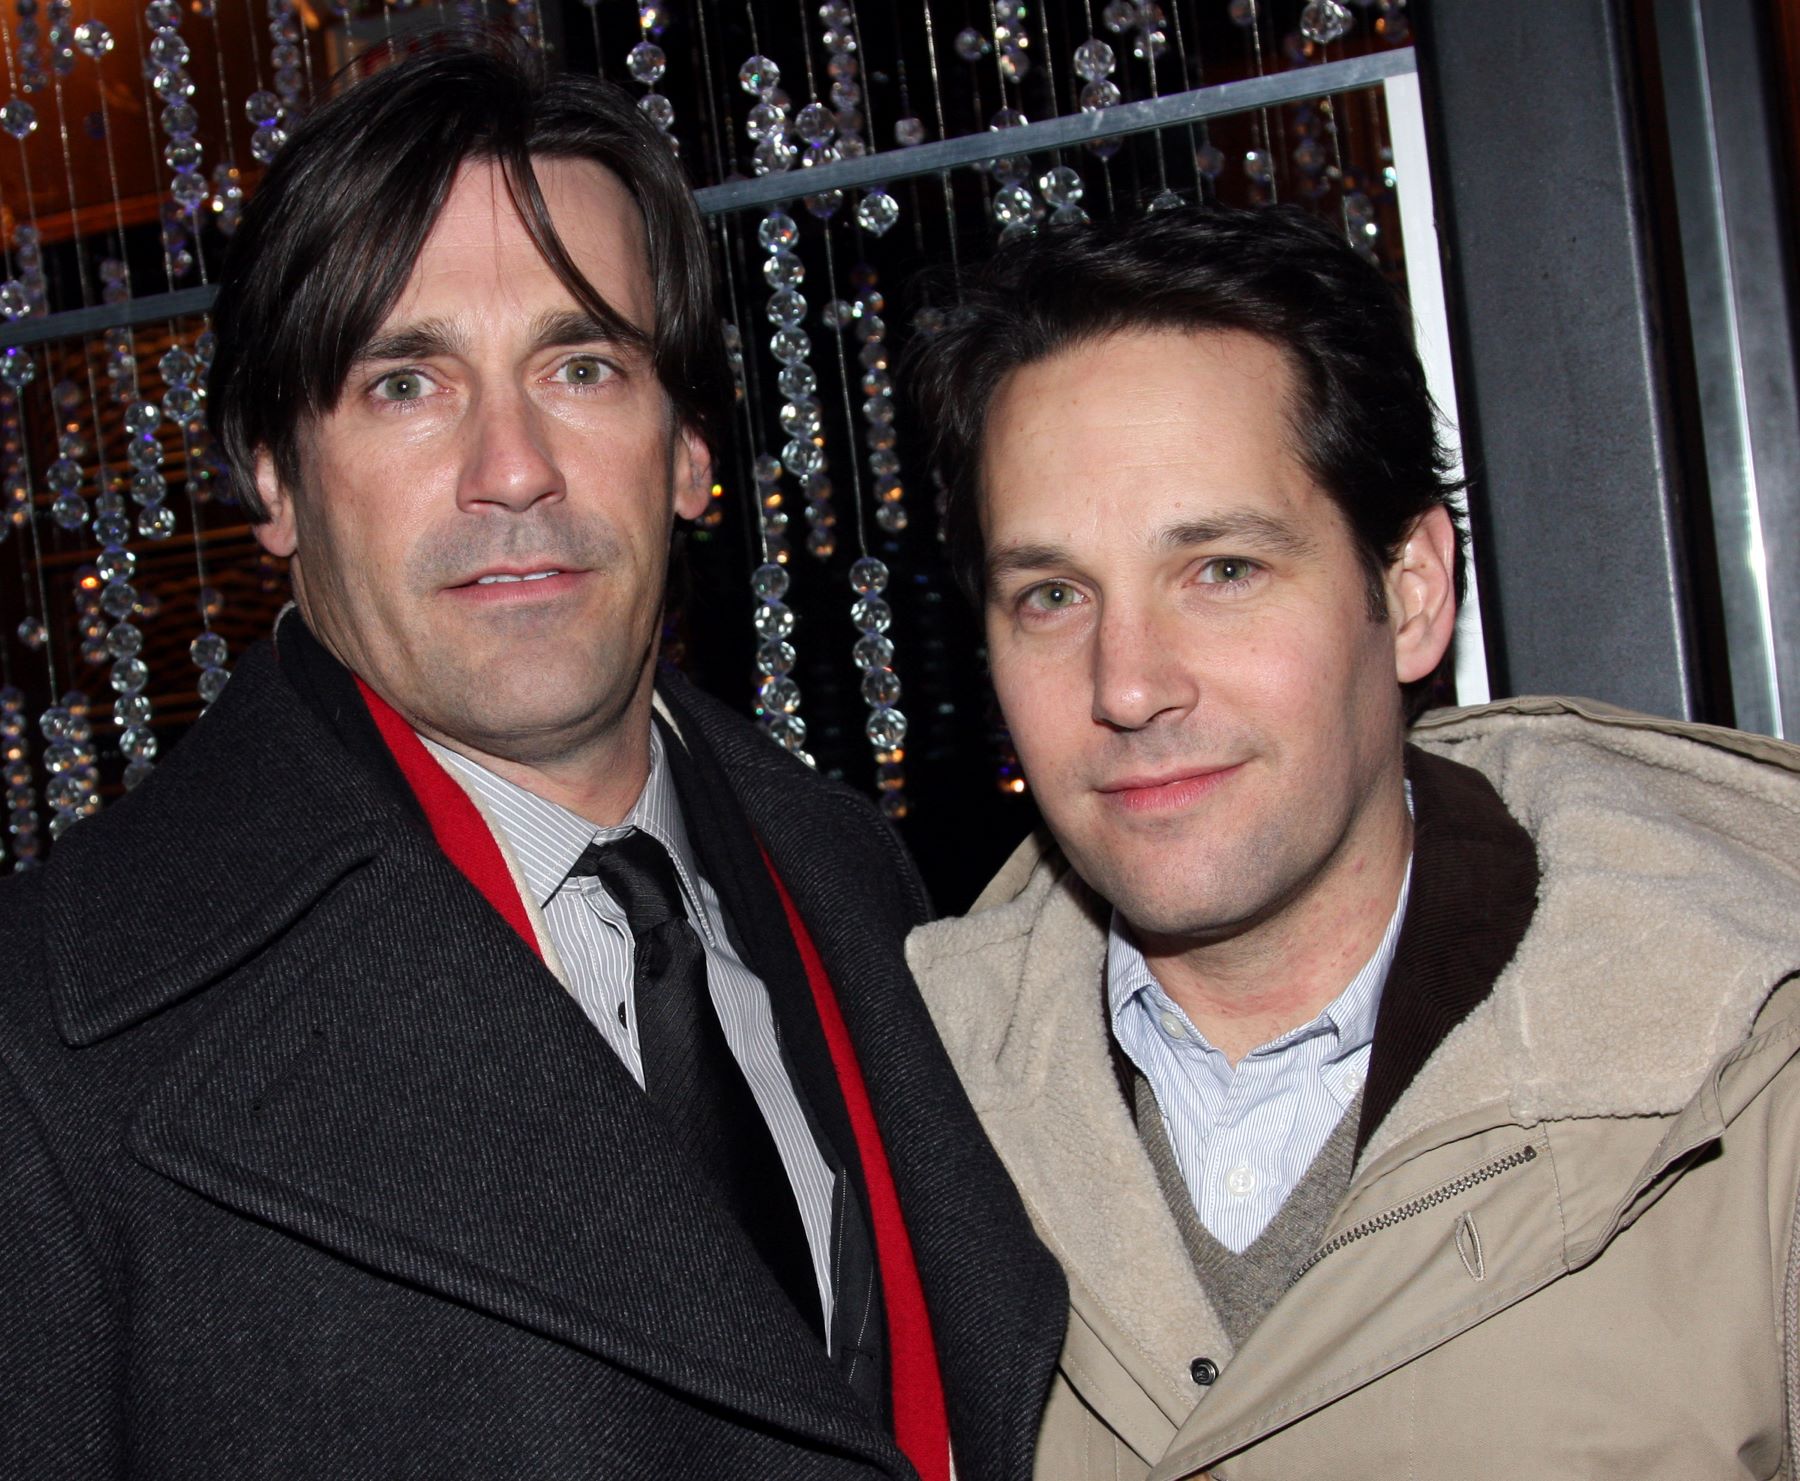 Paul Rudd Was ‘Not so Crazy’ About Jon Hamm When Their Paths Crossed in College: He Was ‘Emasculating’